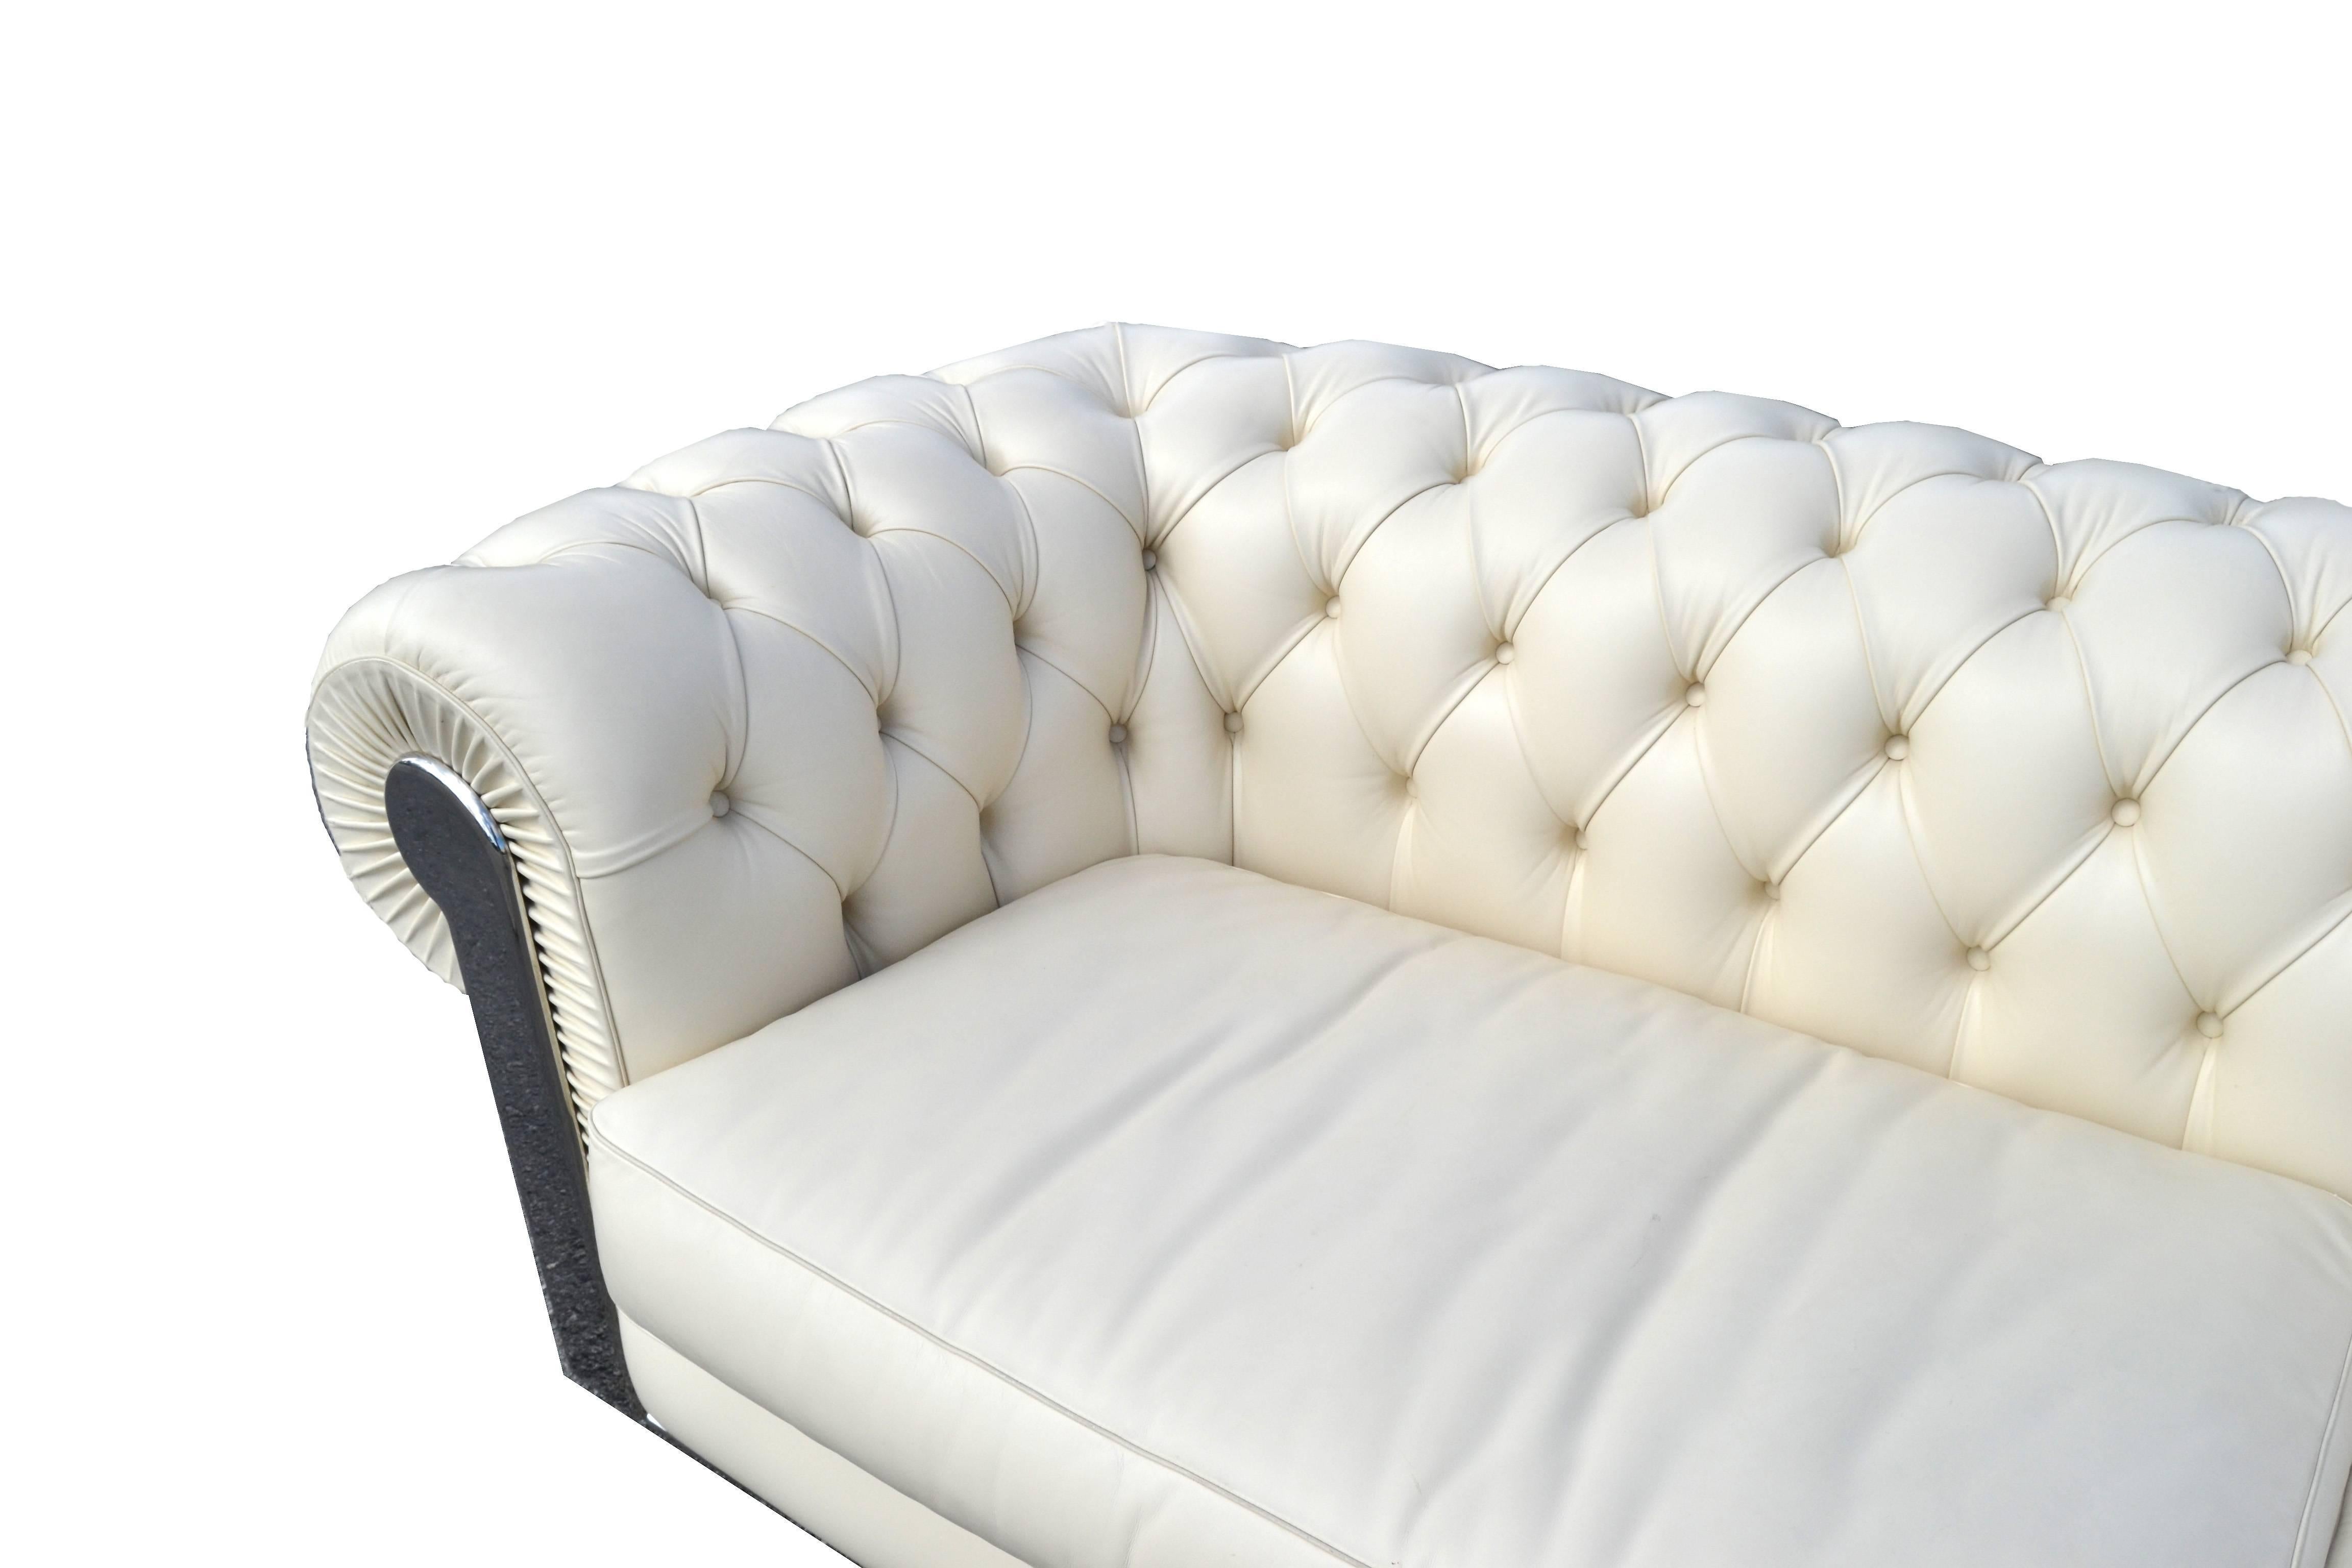 Fendi Casa Albino Tufted Leather Sofa in Chesterfield Style (Ende des 20. Jahrhunderts)